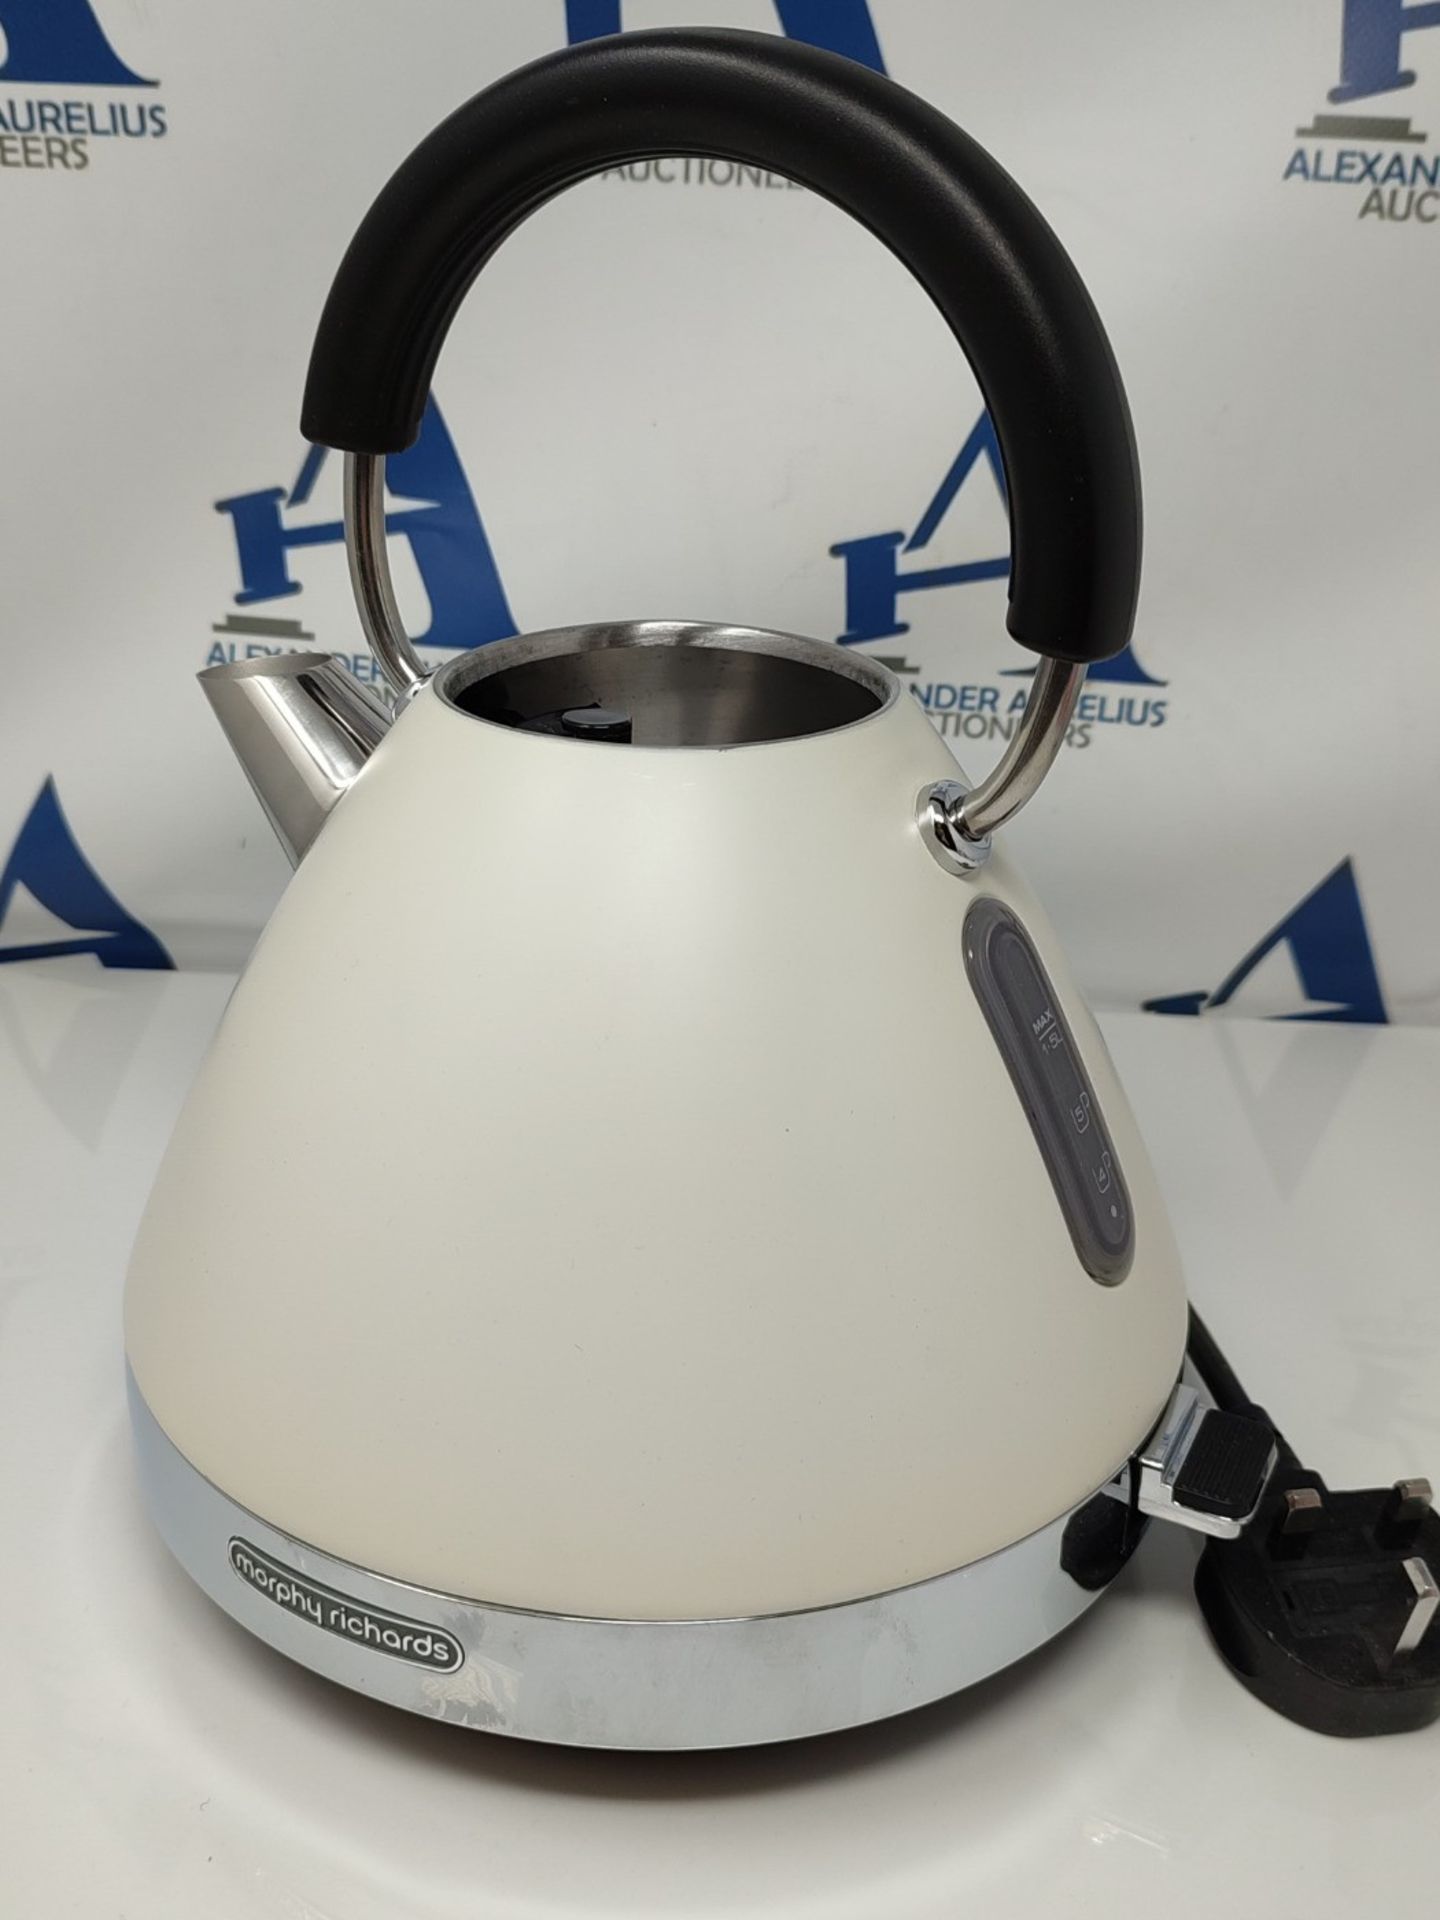 Morphy Richards Venture Cream Pyramid Kettle - 1.5L - 3kW - Rapid Boil - 100132 - Image 2 of 3